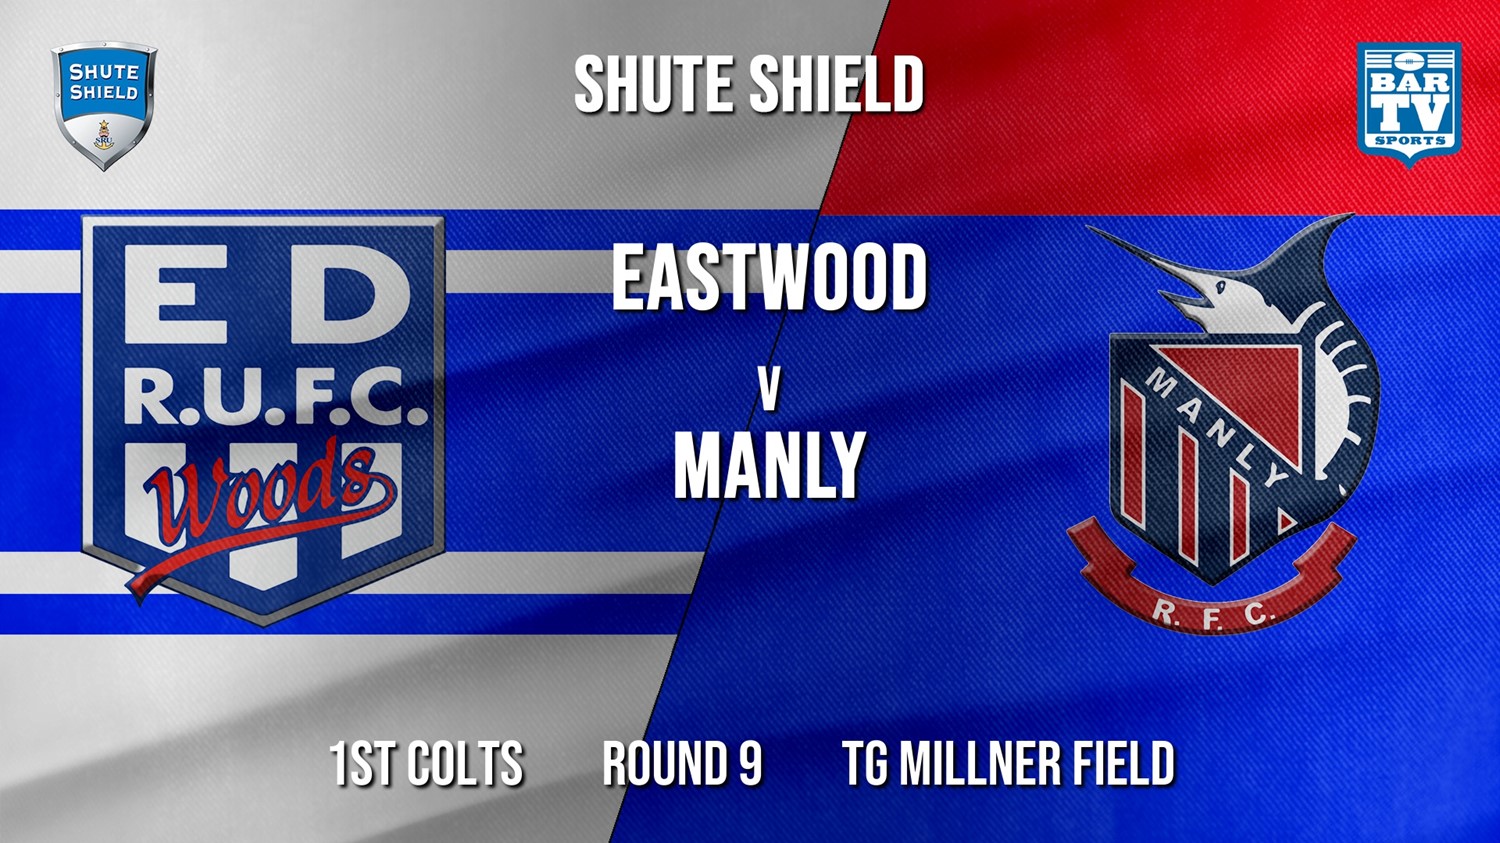 Shute Shield Round 9 - 1st Colts - Eastwood v Manly Minigame Slate Image